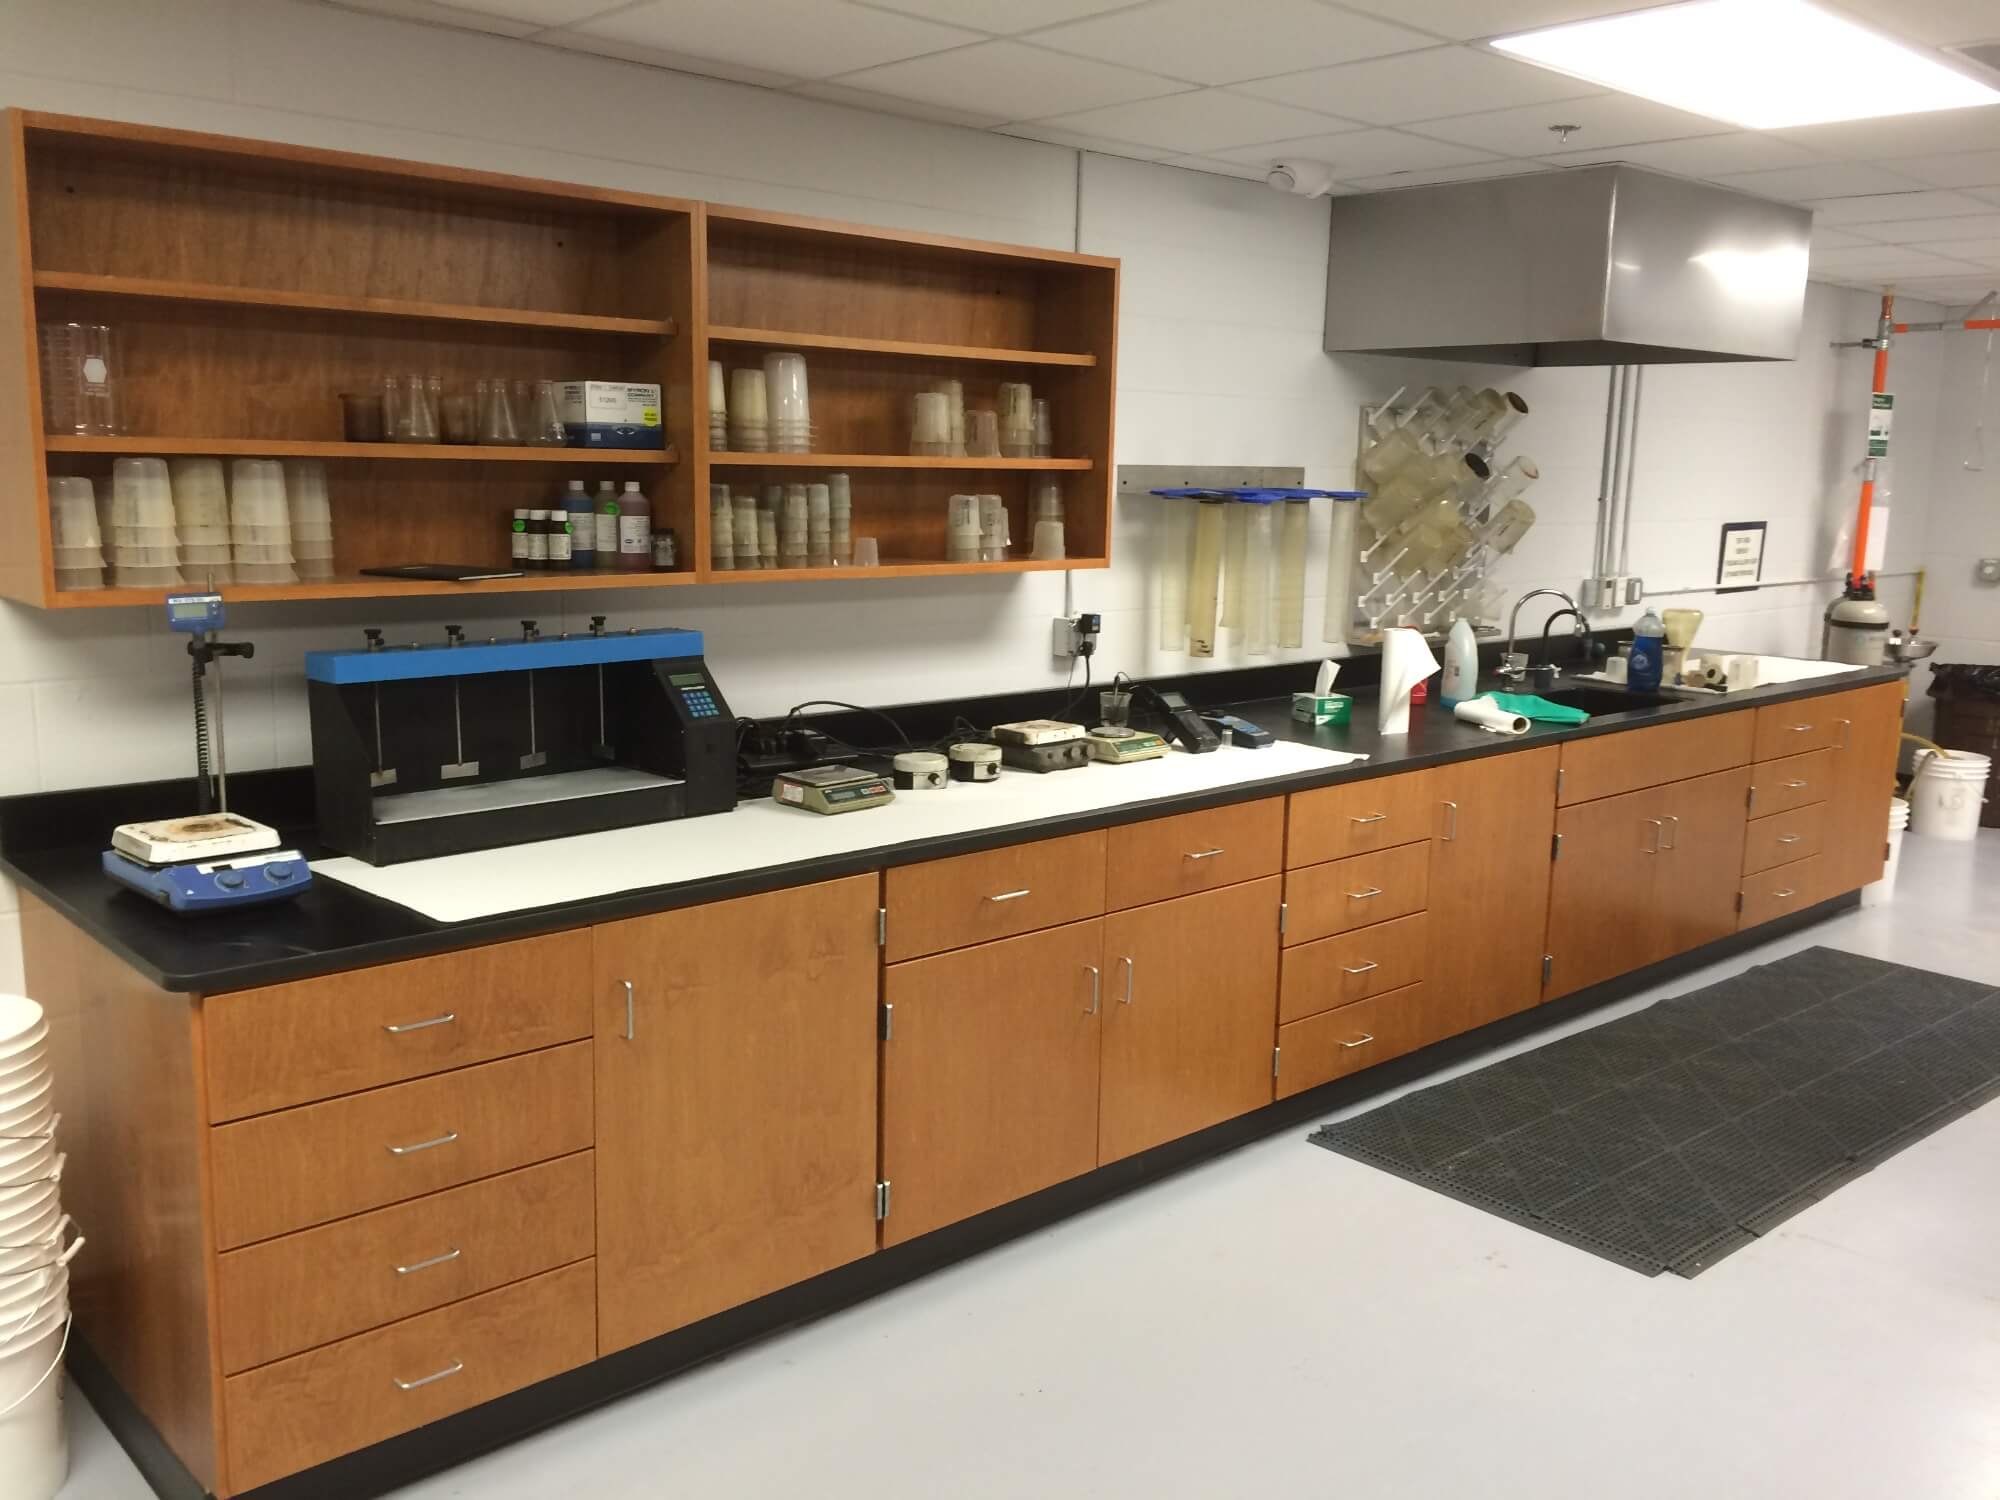 Quality Control Lab designed with industrial-grade wood casework